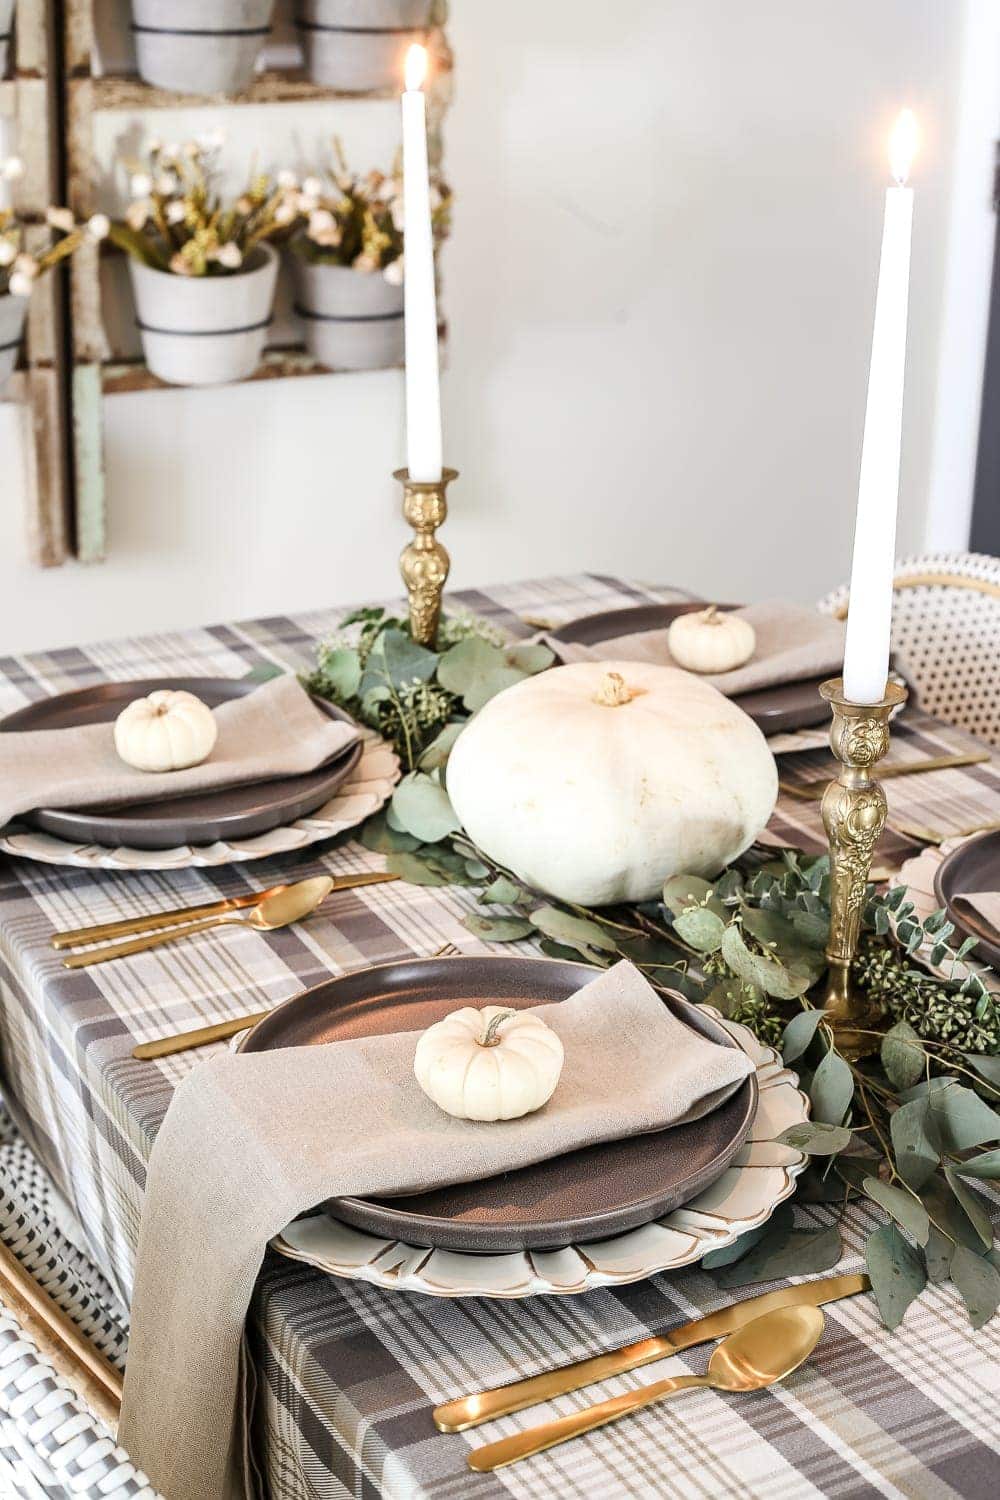 Neutral Low-Key Thanksgiving Tablescape | blesserhouse.com - A neutral low-key Thanksgiving tablescape that is simple and inexpensive to recreate using plaid fabric, white pumpkins, eucalyptus, and brass.